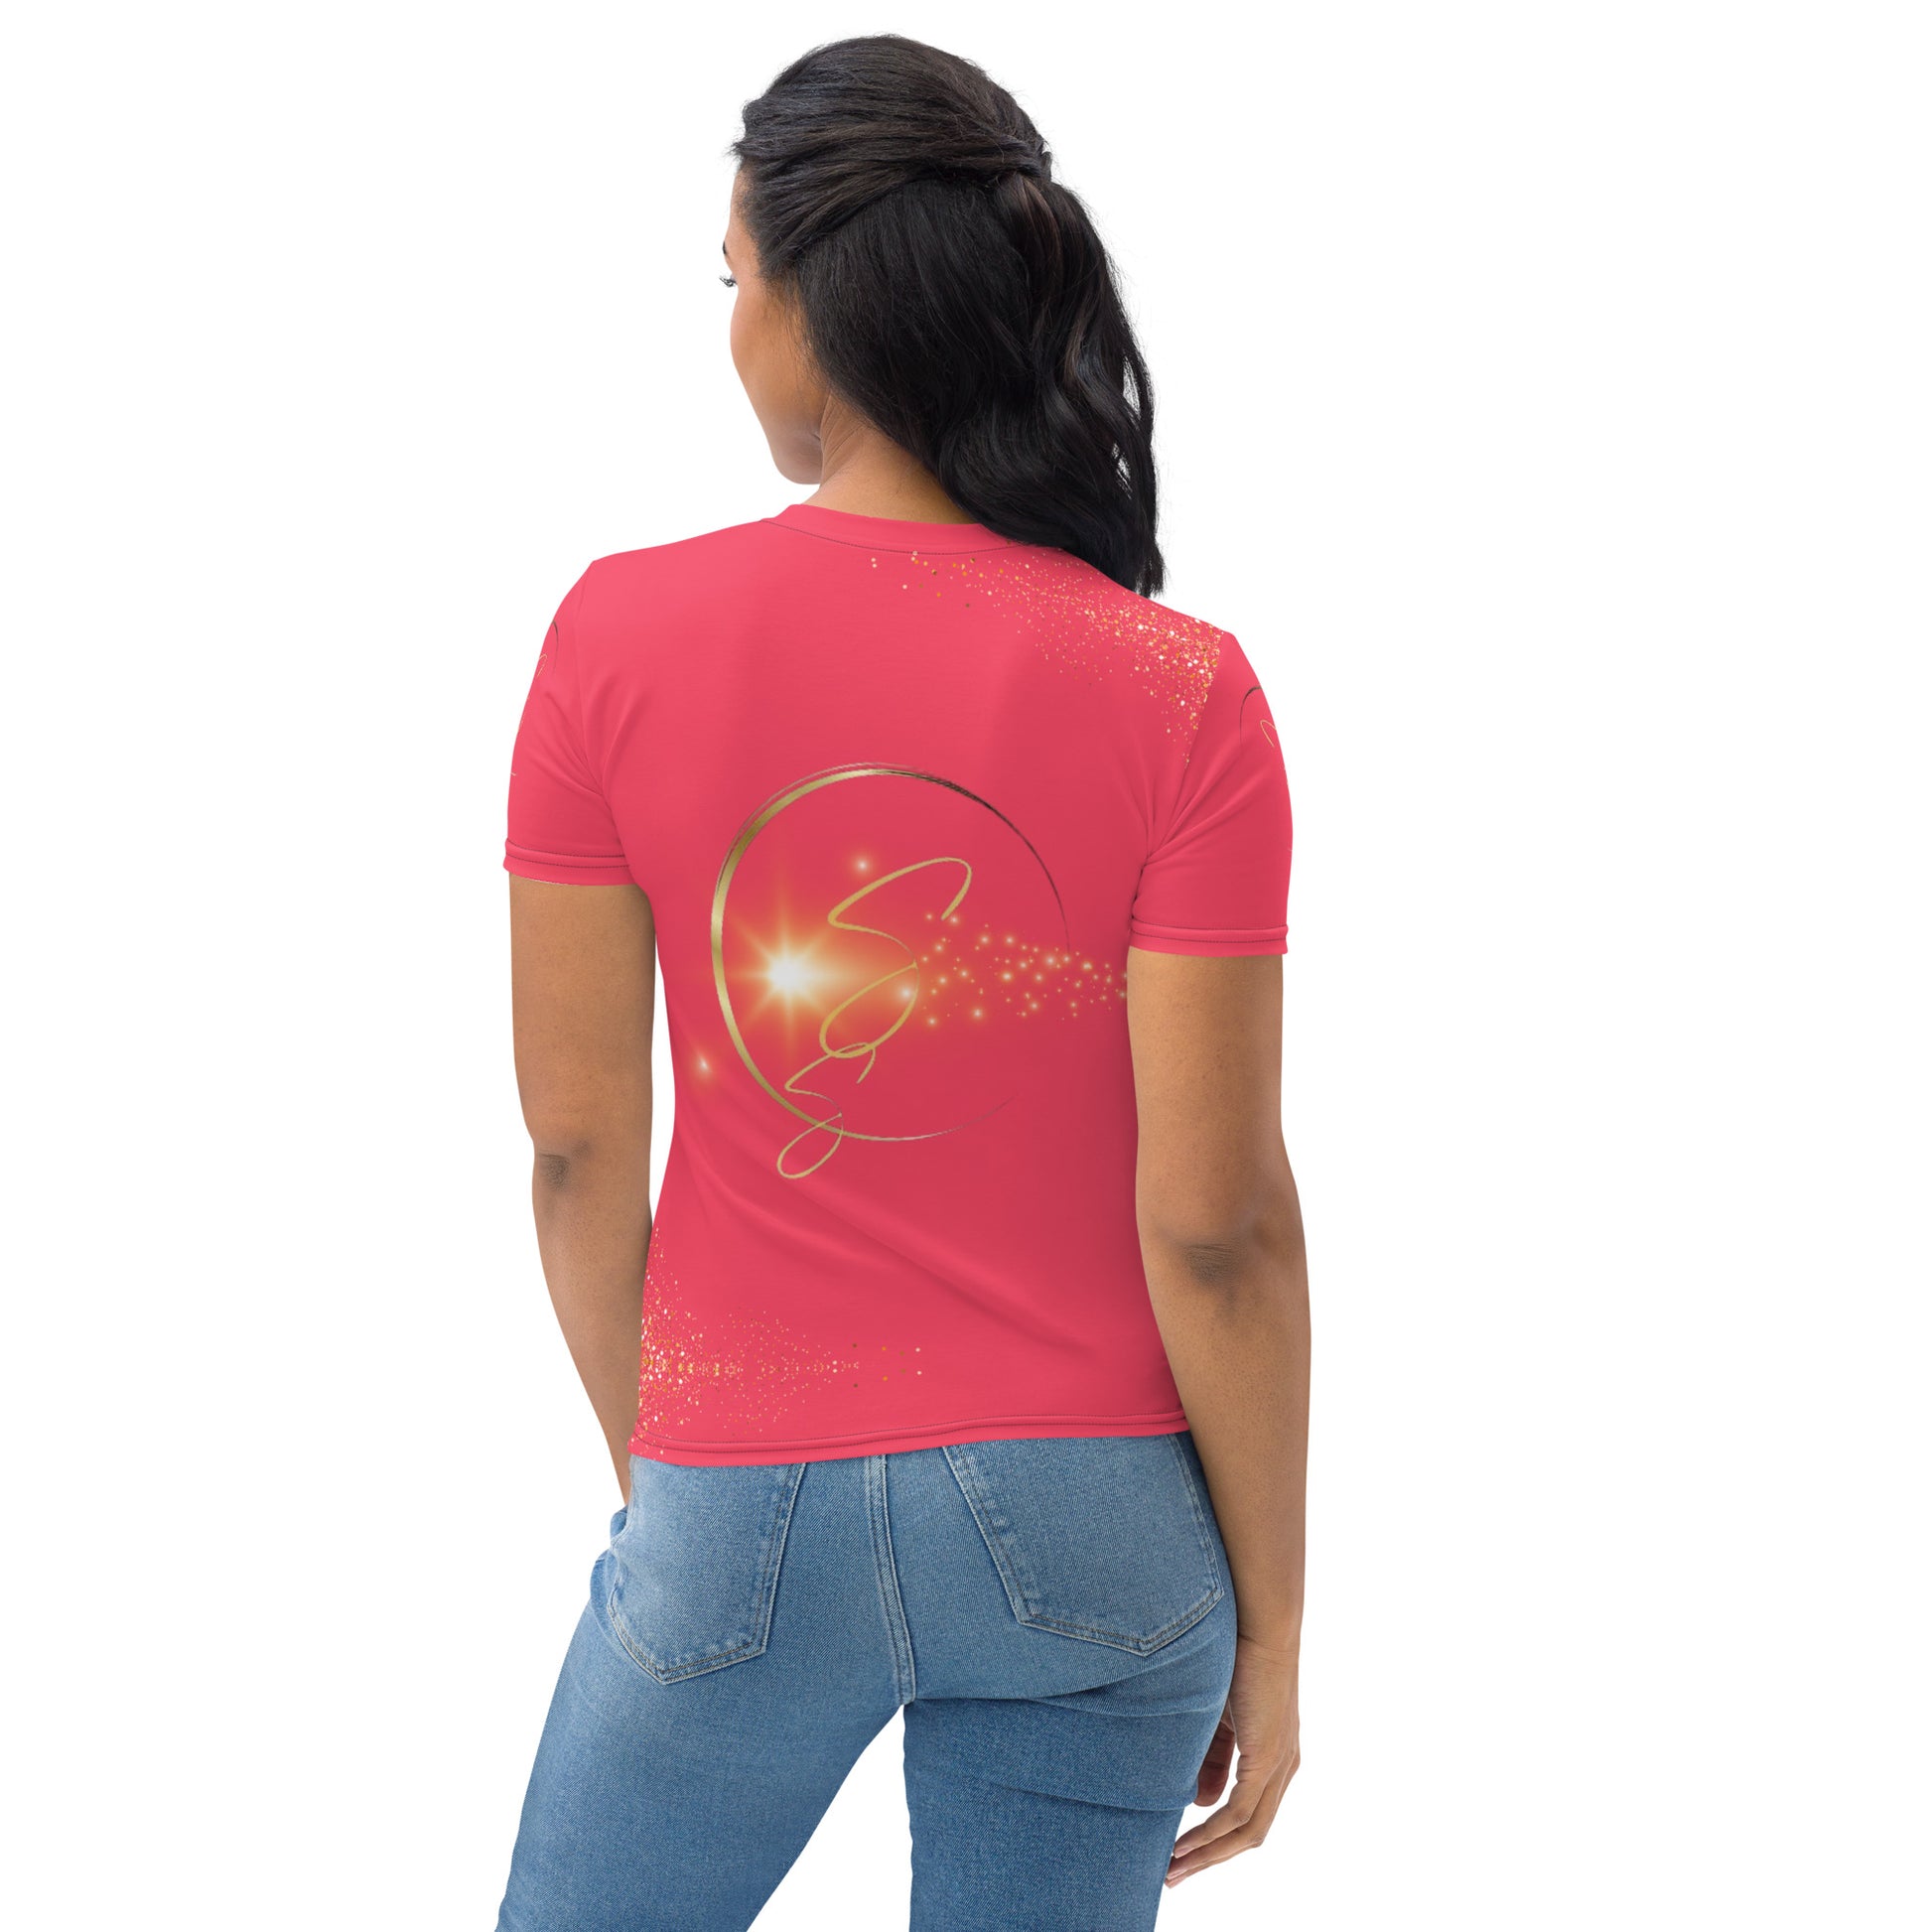 🎨 Unleash Your Rebel Spirit: Female Artist’s Radical Red T-Shirt! 🔥👩‍🎨 Don't miss out – Be a Rebel Artist! 🔥🎨